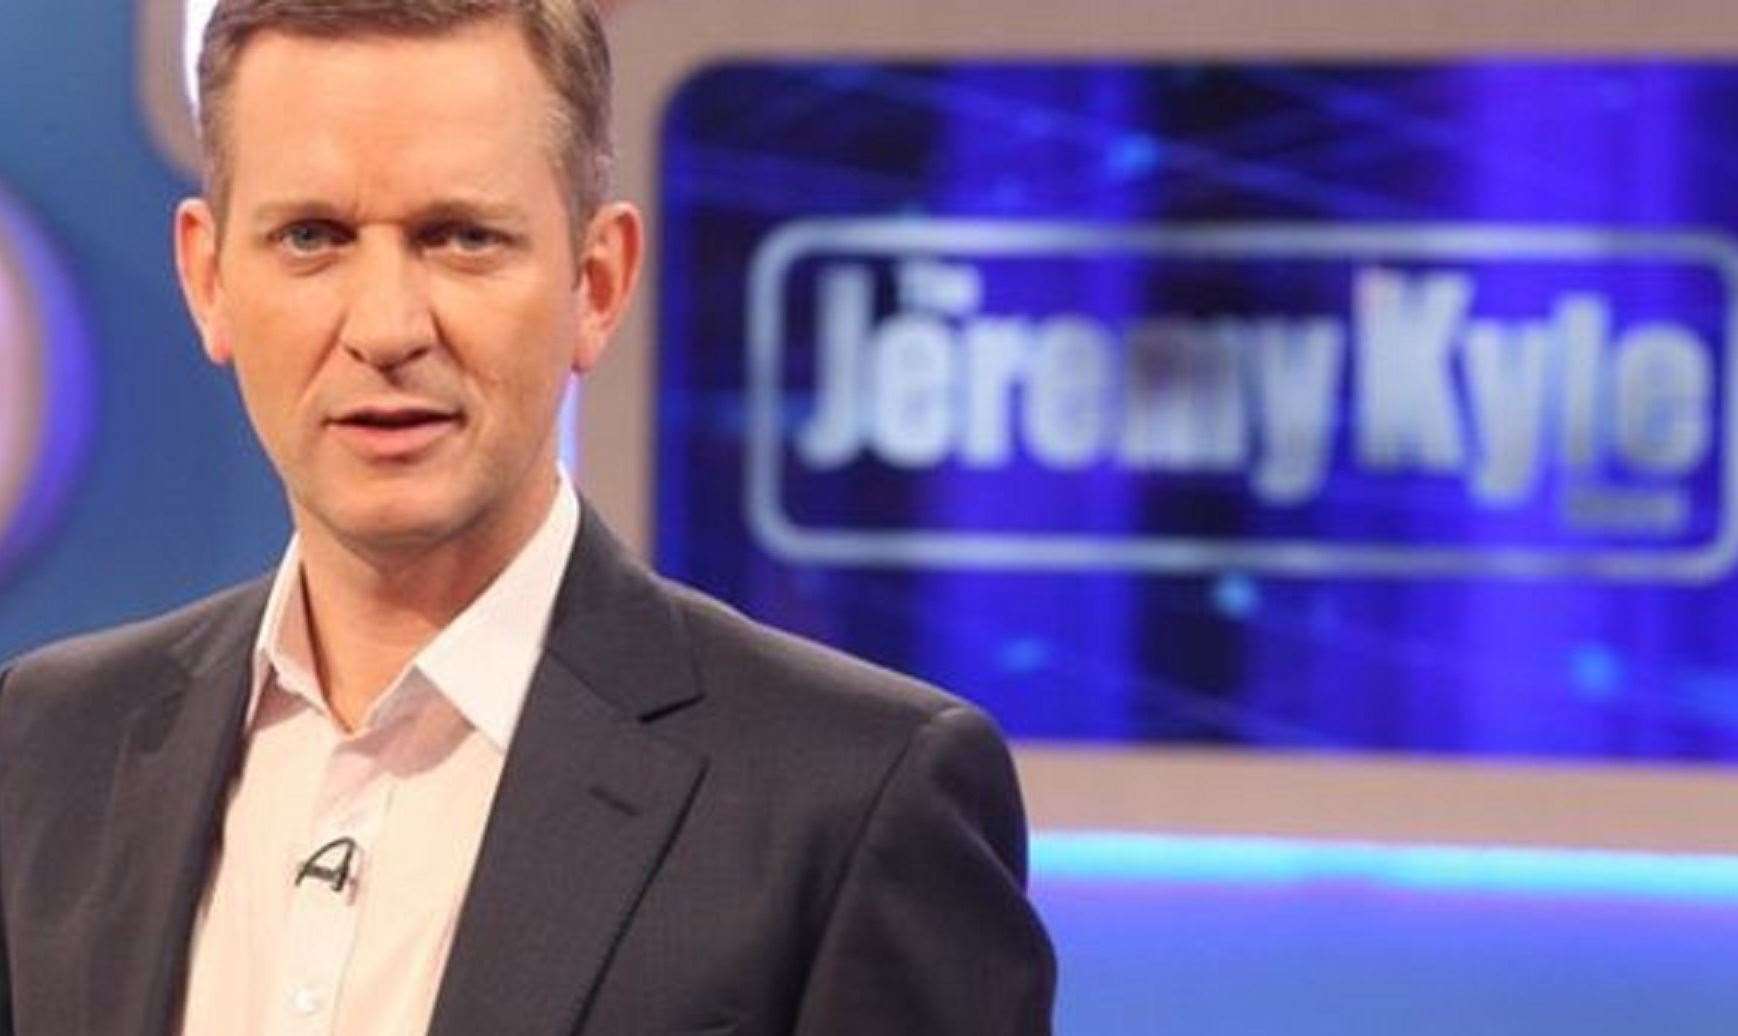 The Jeremy Kyle show has been axed forever following the death of a guest shortly after an appearance on the programme